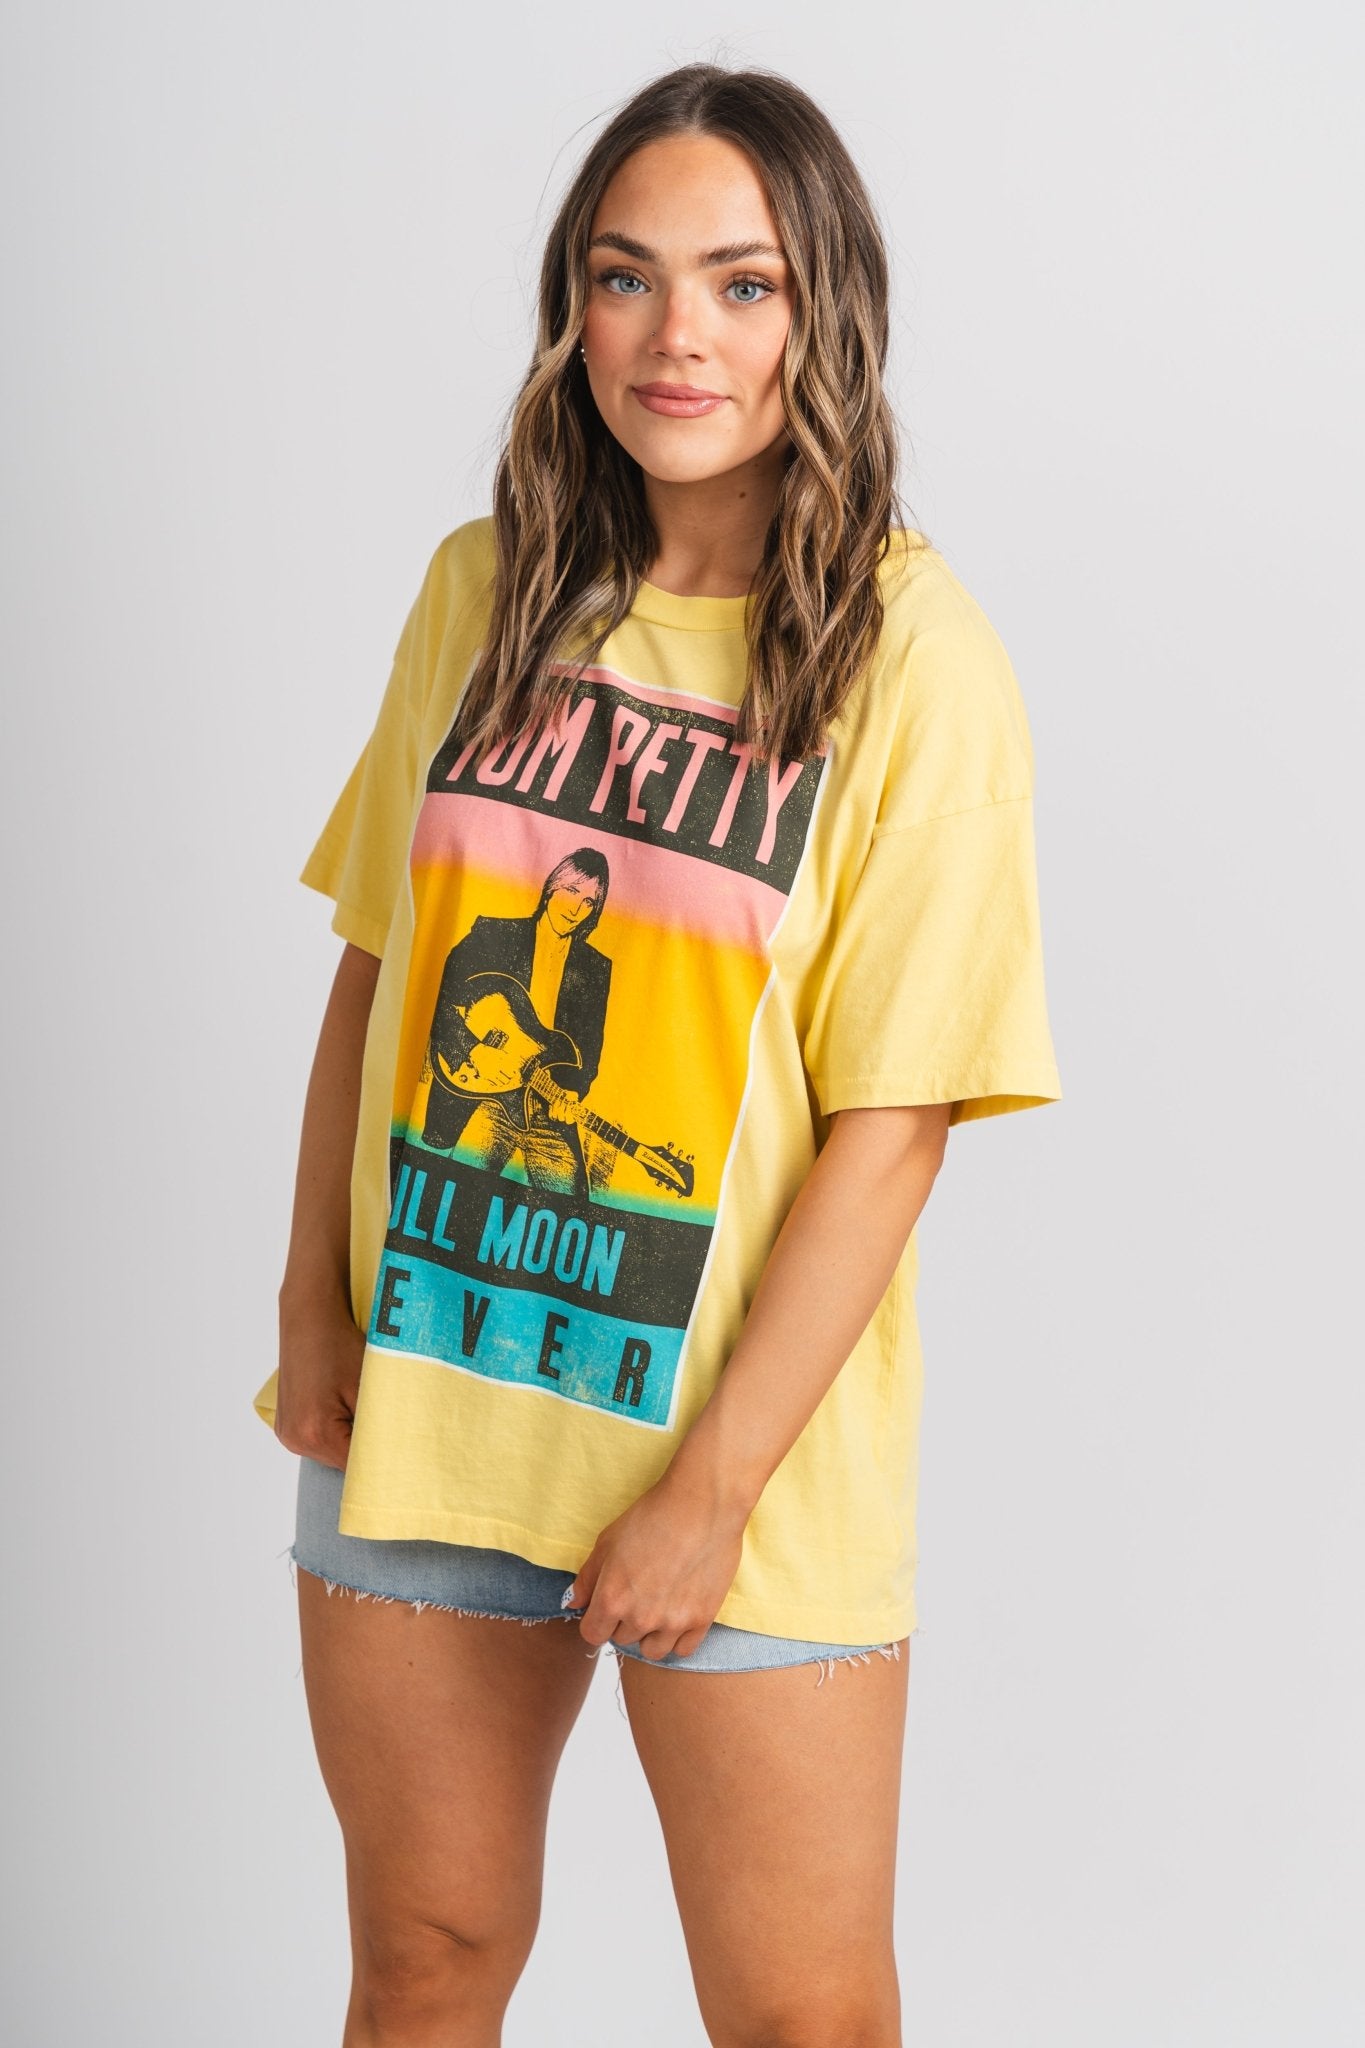 DayDreamer Tom Petty full moon fever t-shirt yellow bloom - Stylish Band T-Shirts and Sweatshirts at Lush Fashion Lounge Boutique in Oklahoma City